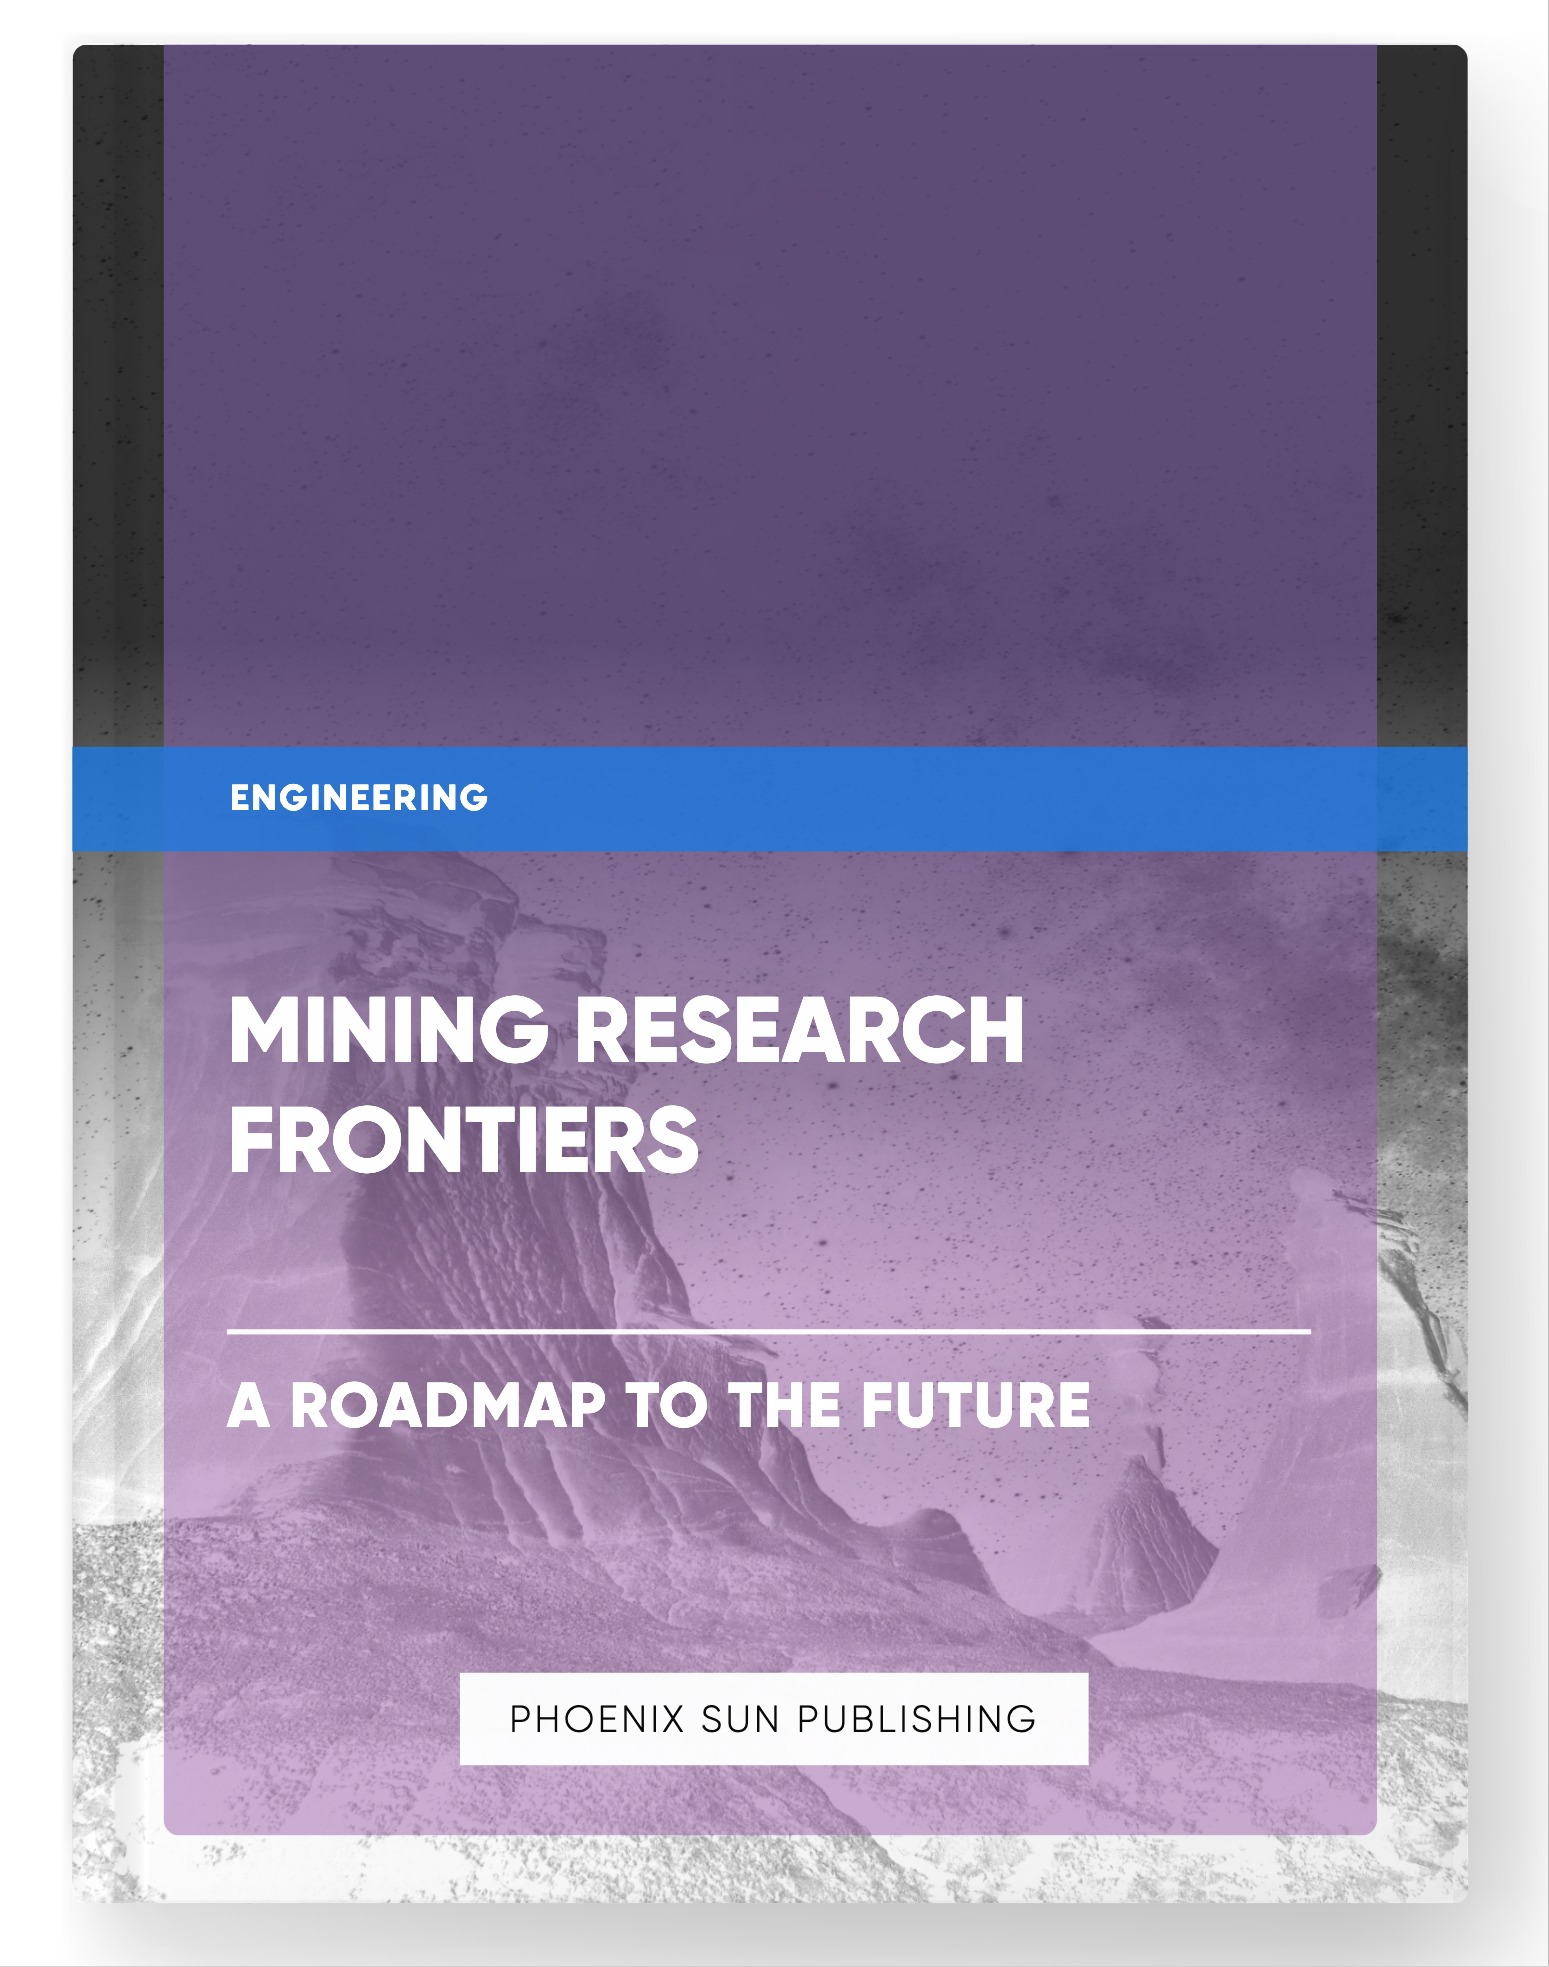 Mining Research Frontiers – A Roadmap to the Future